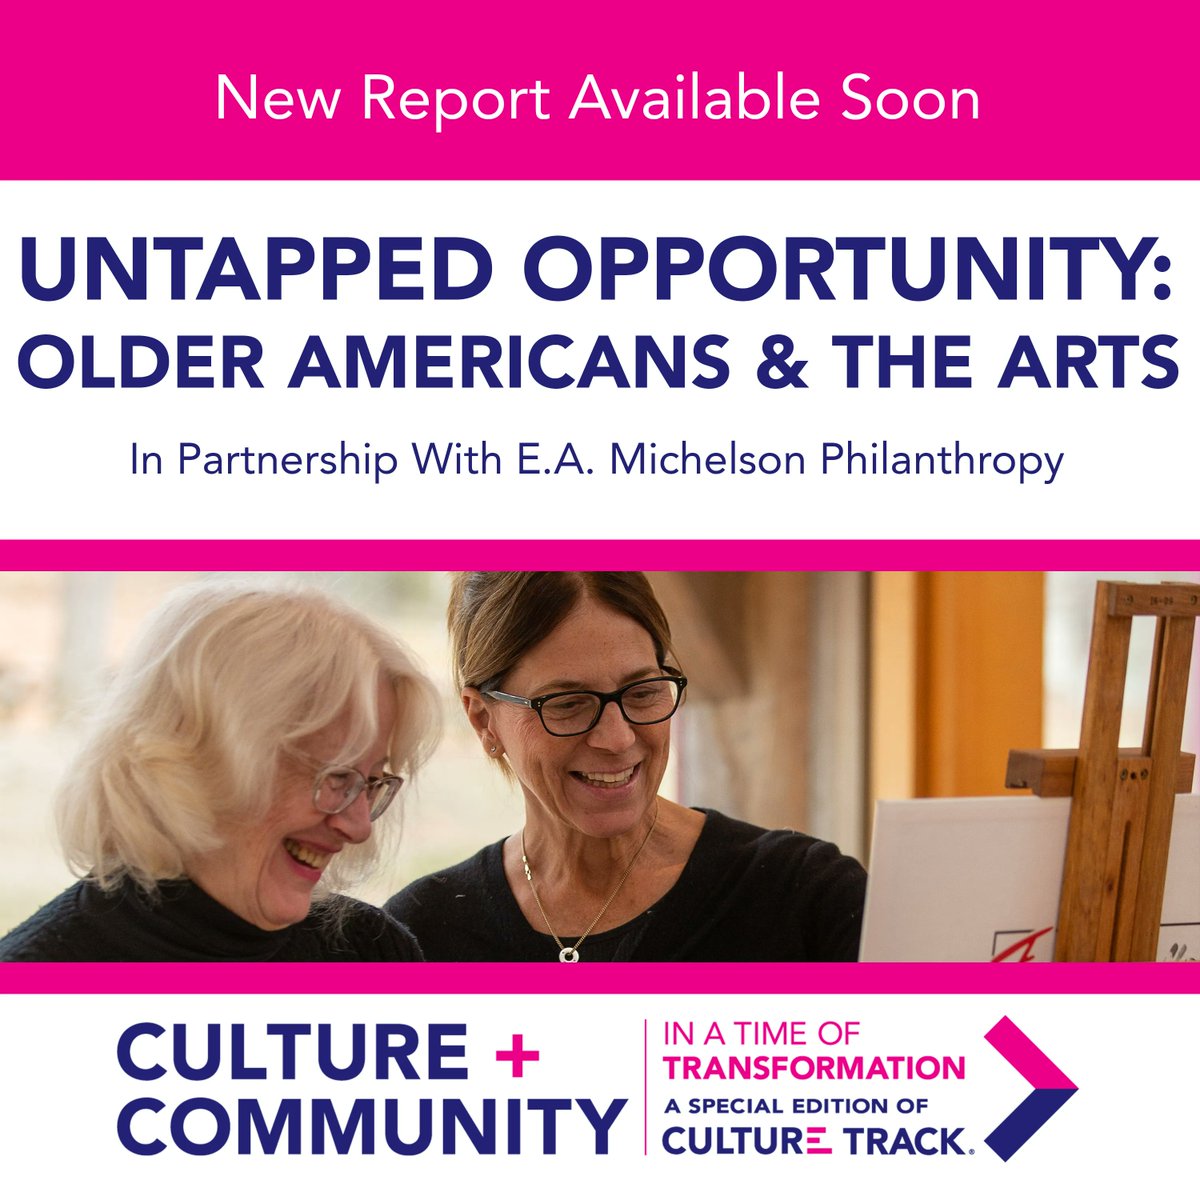 Keep an eye out next week for this important and fascinating report, developed in partnership with @CultureTrack. 

@LaPlacaCohen @SloverLinett #CultureTrack https://t.co/pcTwzXRi6r